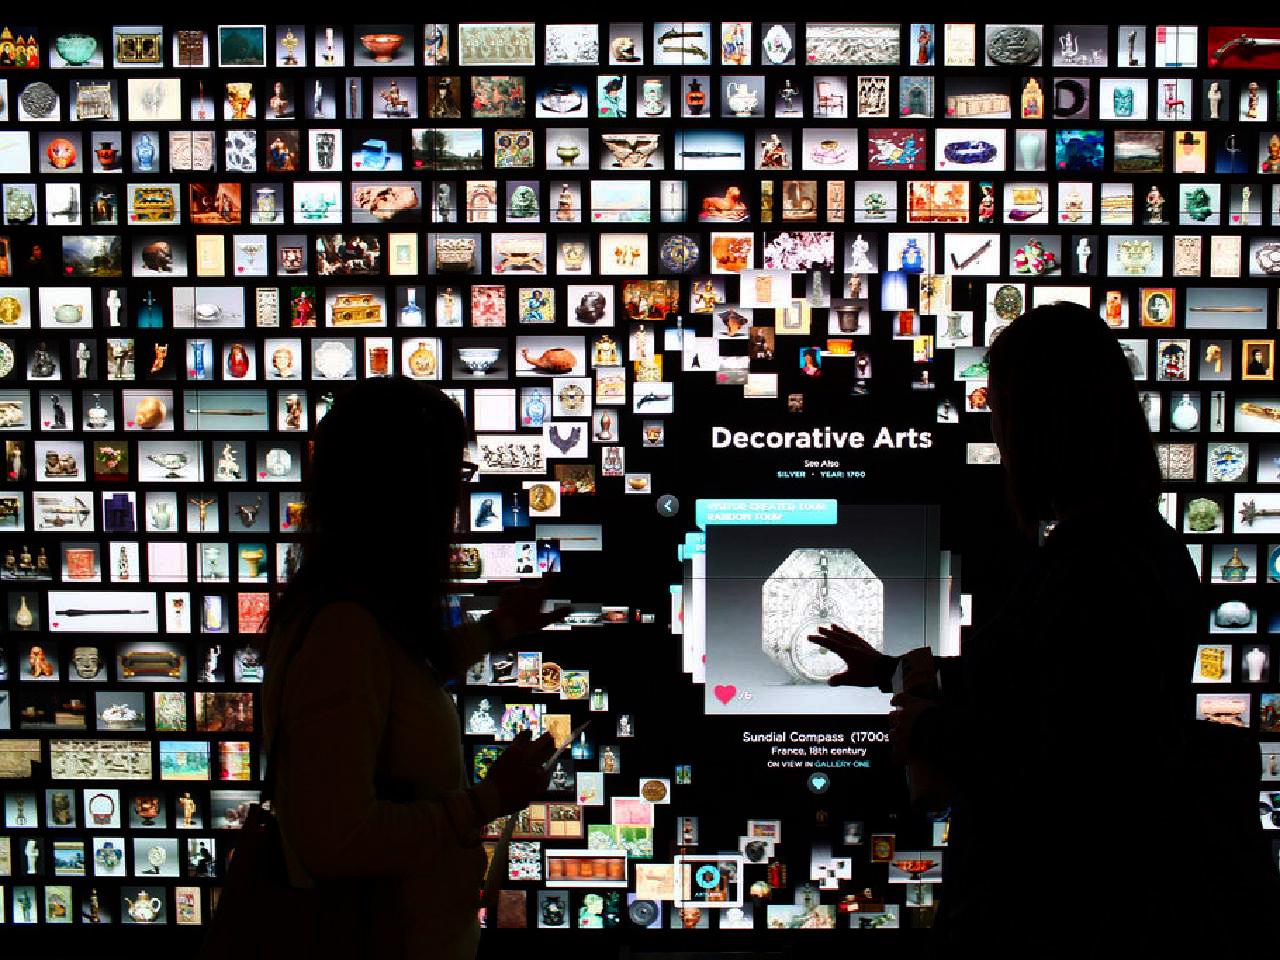 Image of two people in front of a large screen with hundreds of images of works of art. Both are touching the screen and immediately between the two figures a larger artwork image is visible and the words 'decorative arts' are immediately underneath it.